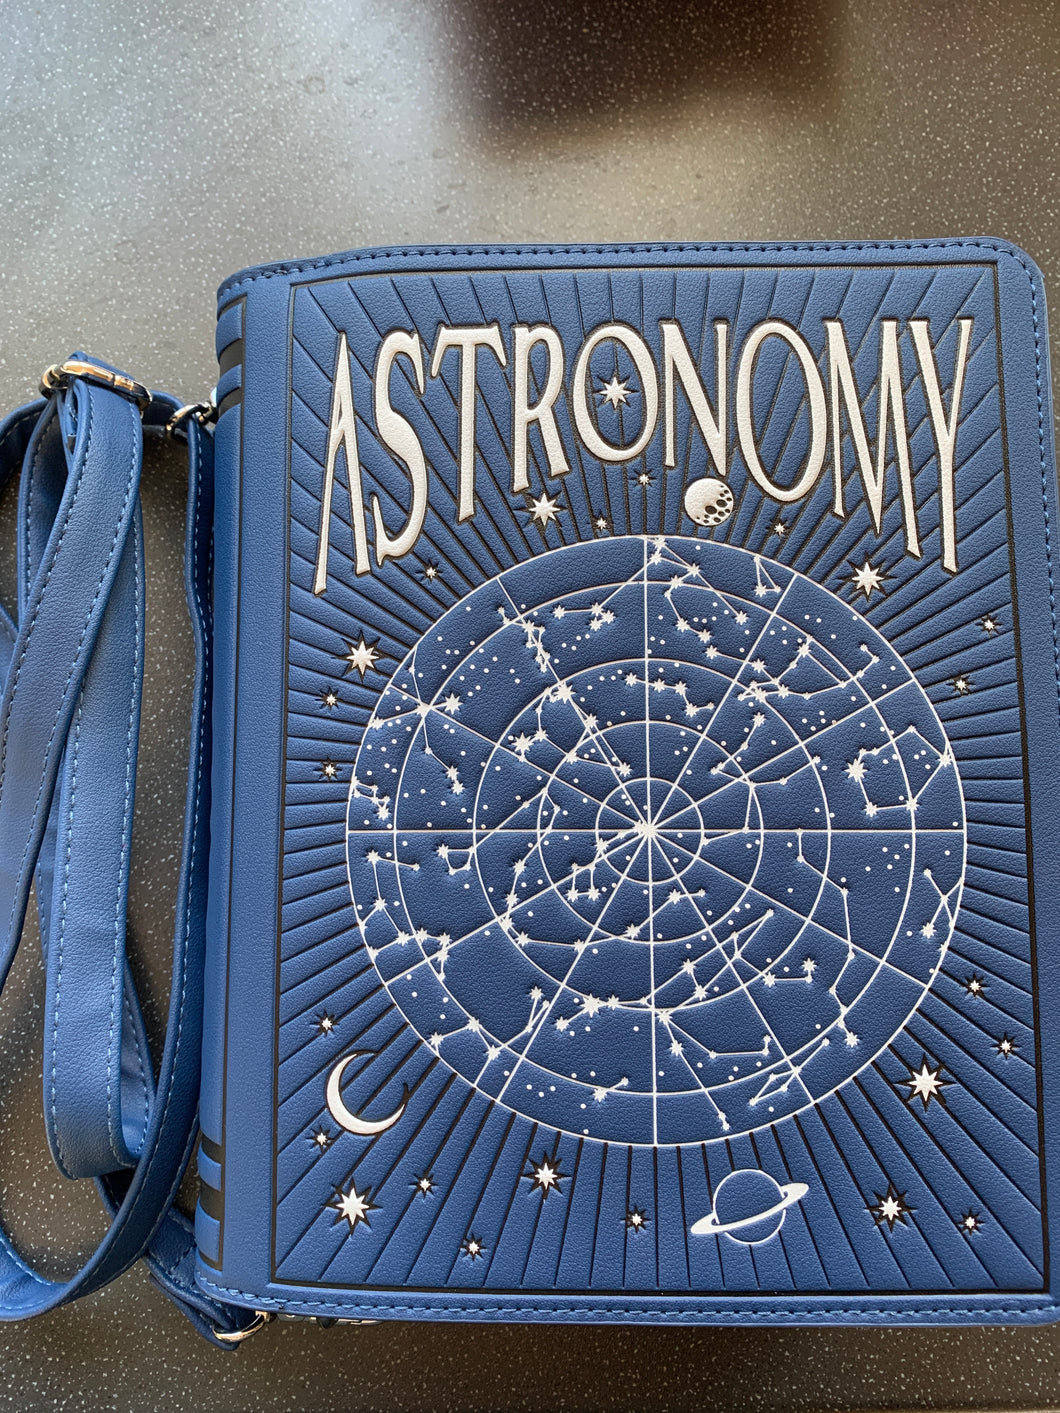 Astronomy Handbag Blue NEW Astrology Book Bag For Law of Attraction Statement Clutch 2 in 1 Bag